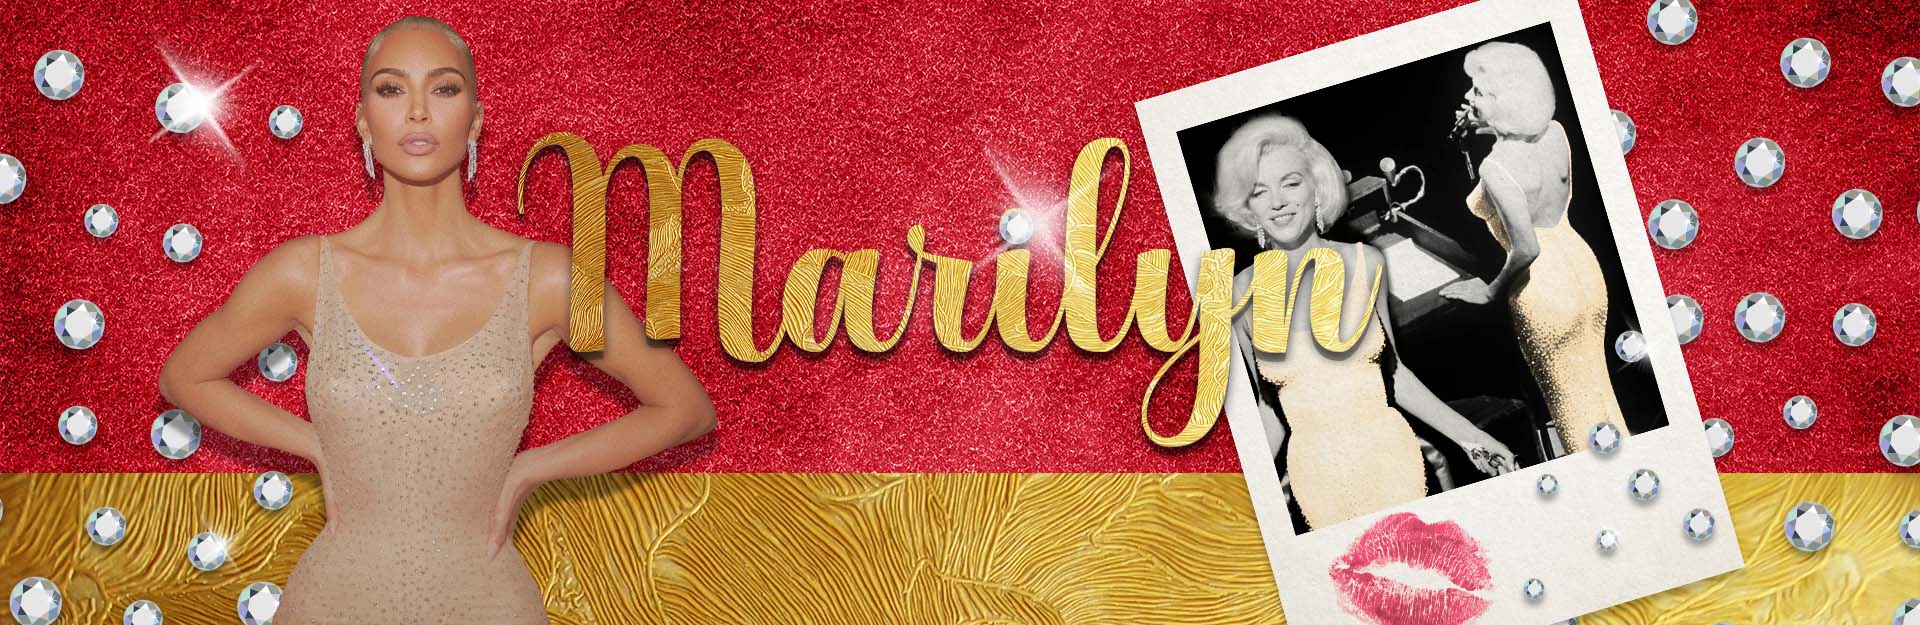 Ripley's Believe It or Not! Hollywood Marylin Monroe